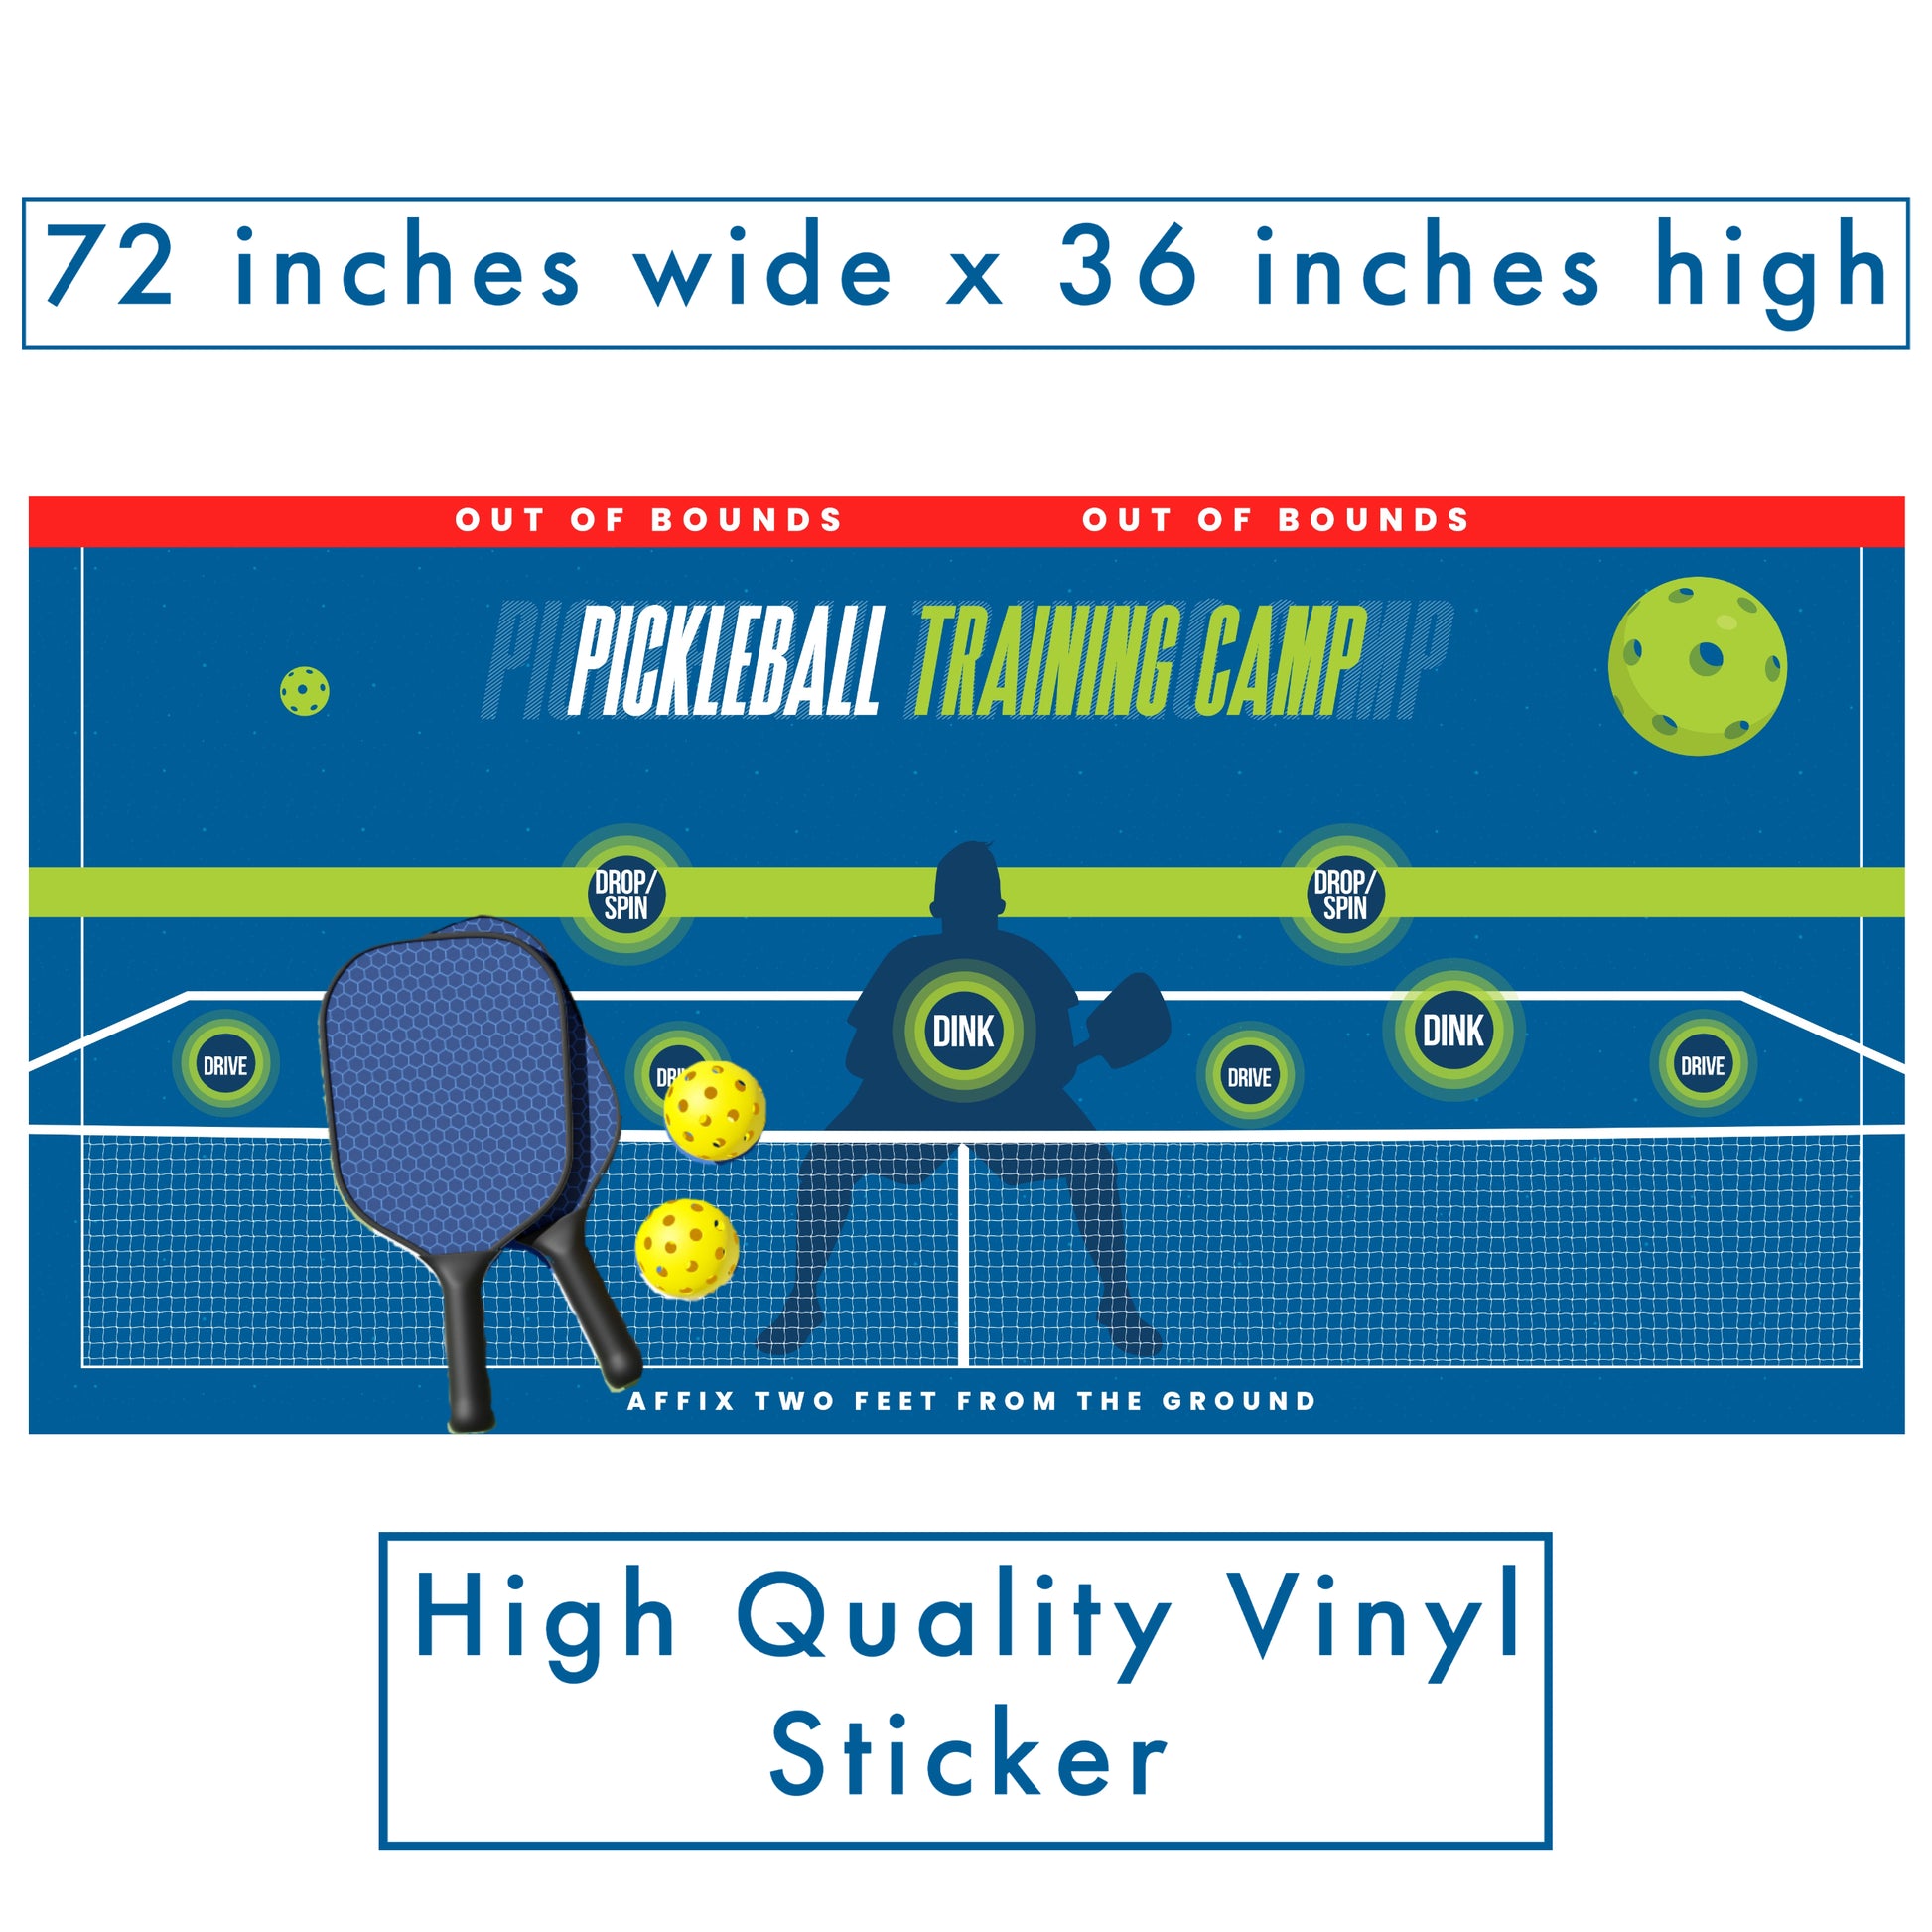 Pickleball Rebounder Sticker XL 6 foot x 3 foot vinyl sticker to practice your dinks, drops, spins for training and practice